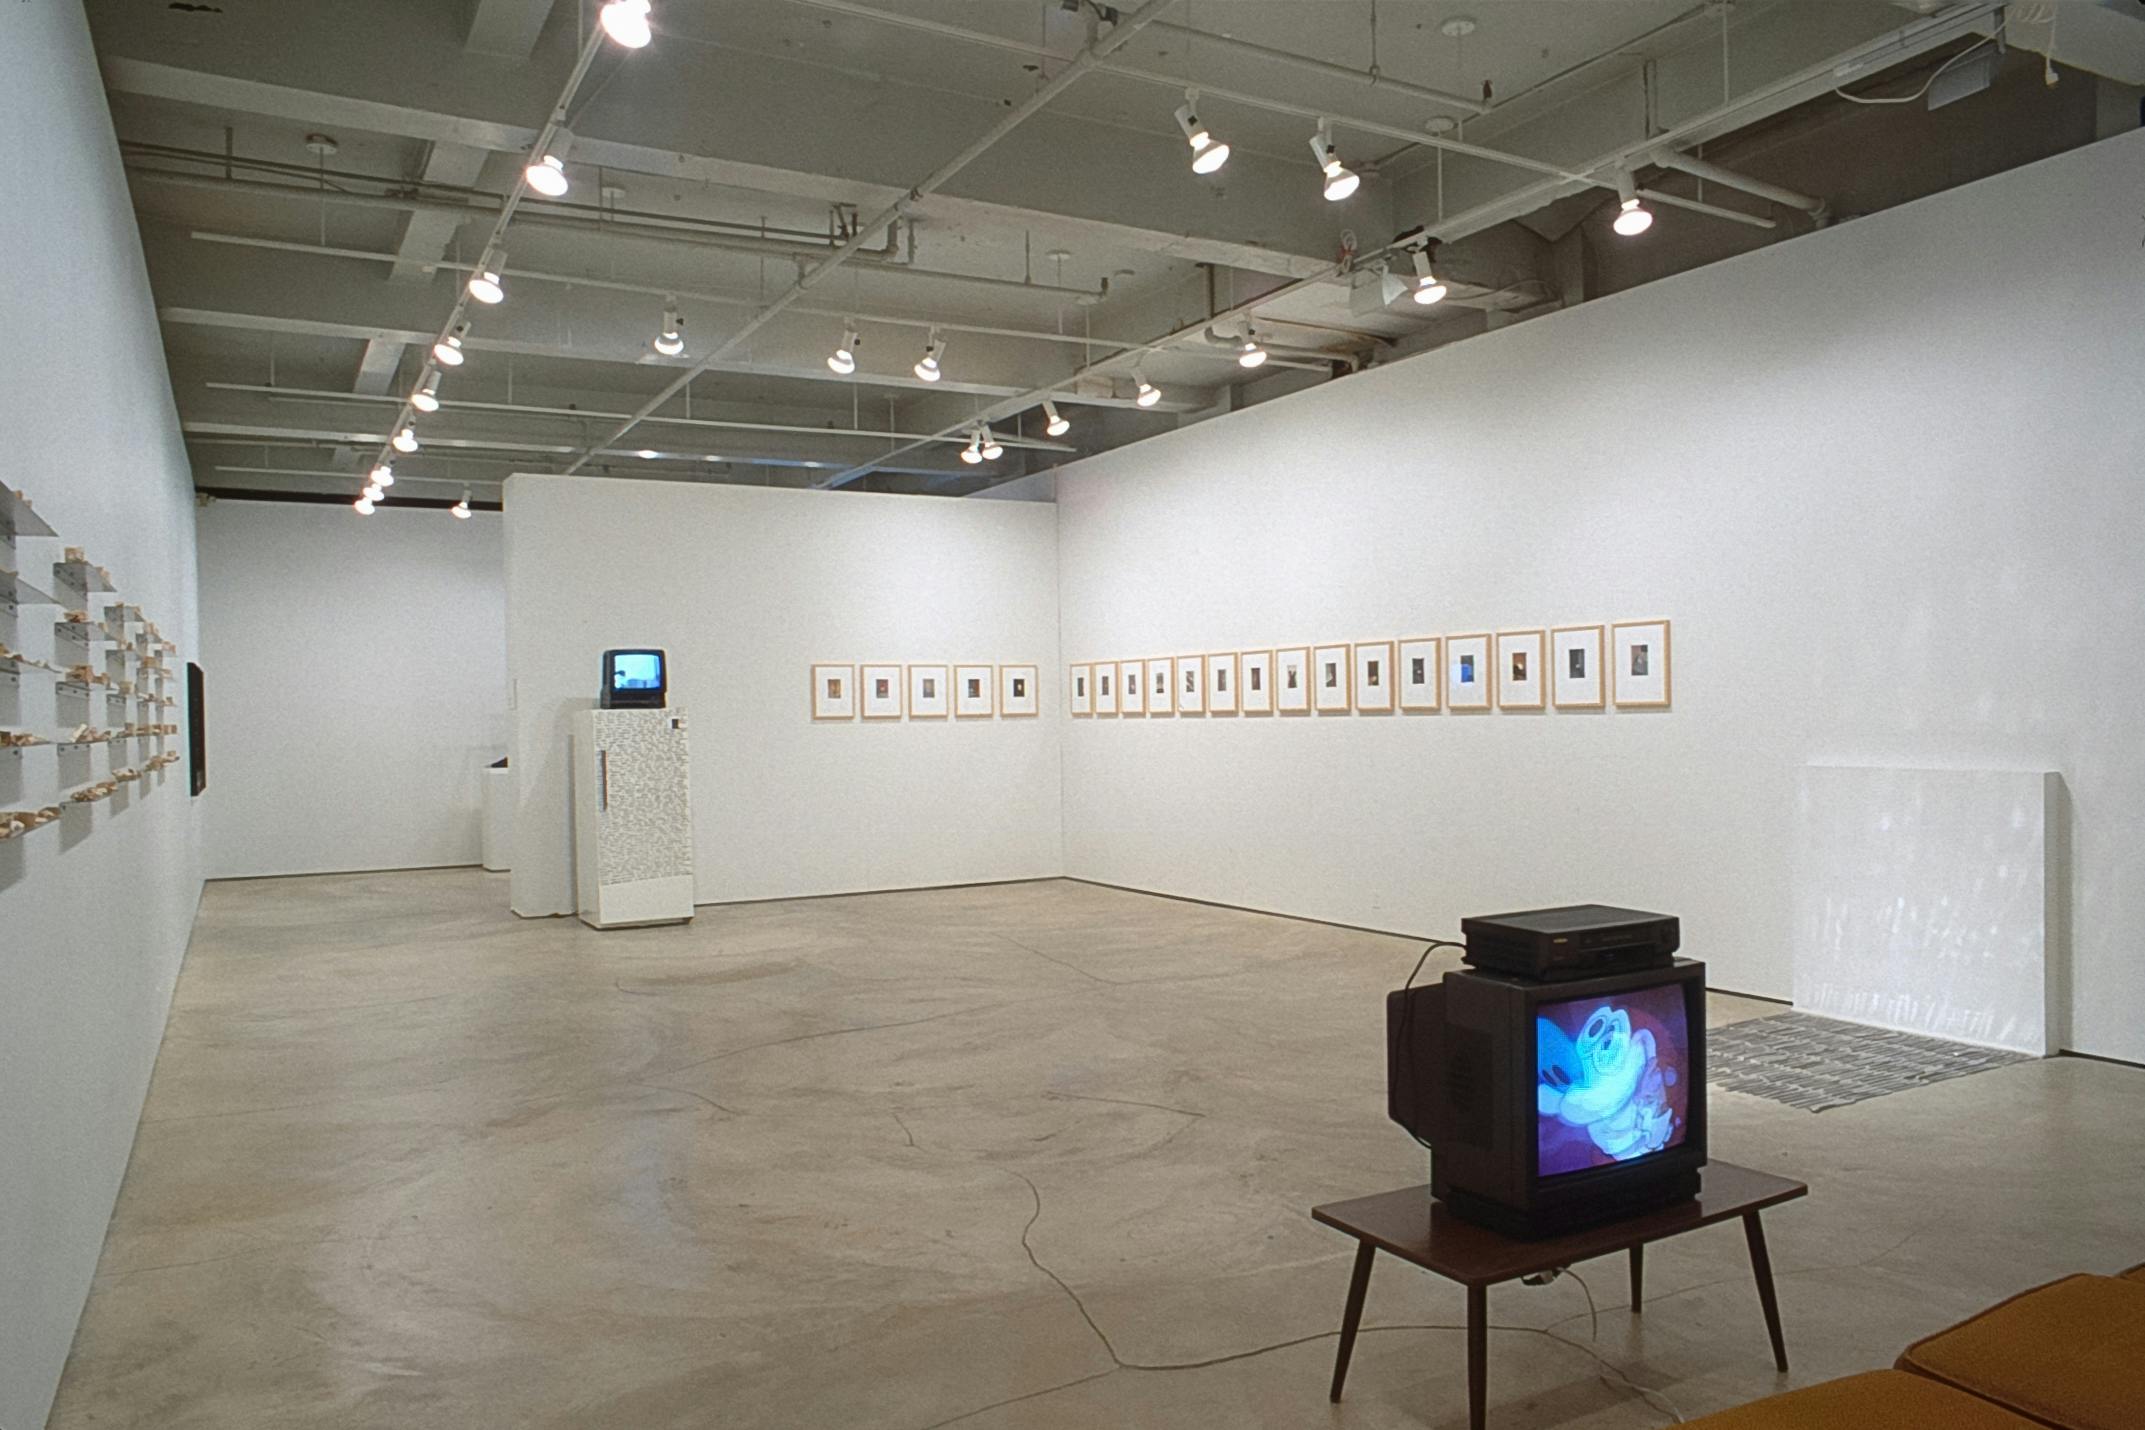 Many artworks are installed in the gallery. Video works are played on two CRT TVs which are placed at the opposite end of the gallery. Two-dimensional works are mounted on the walls between the TVs.